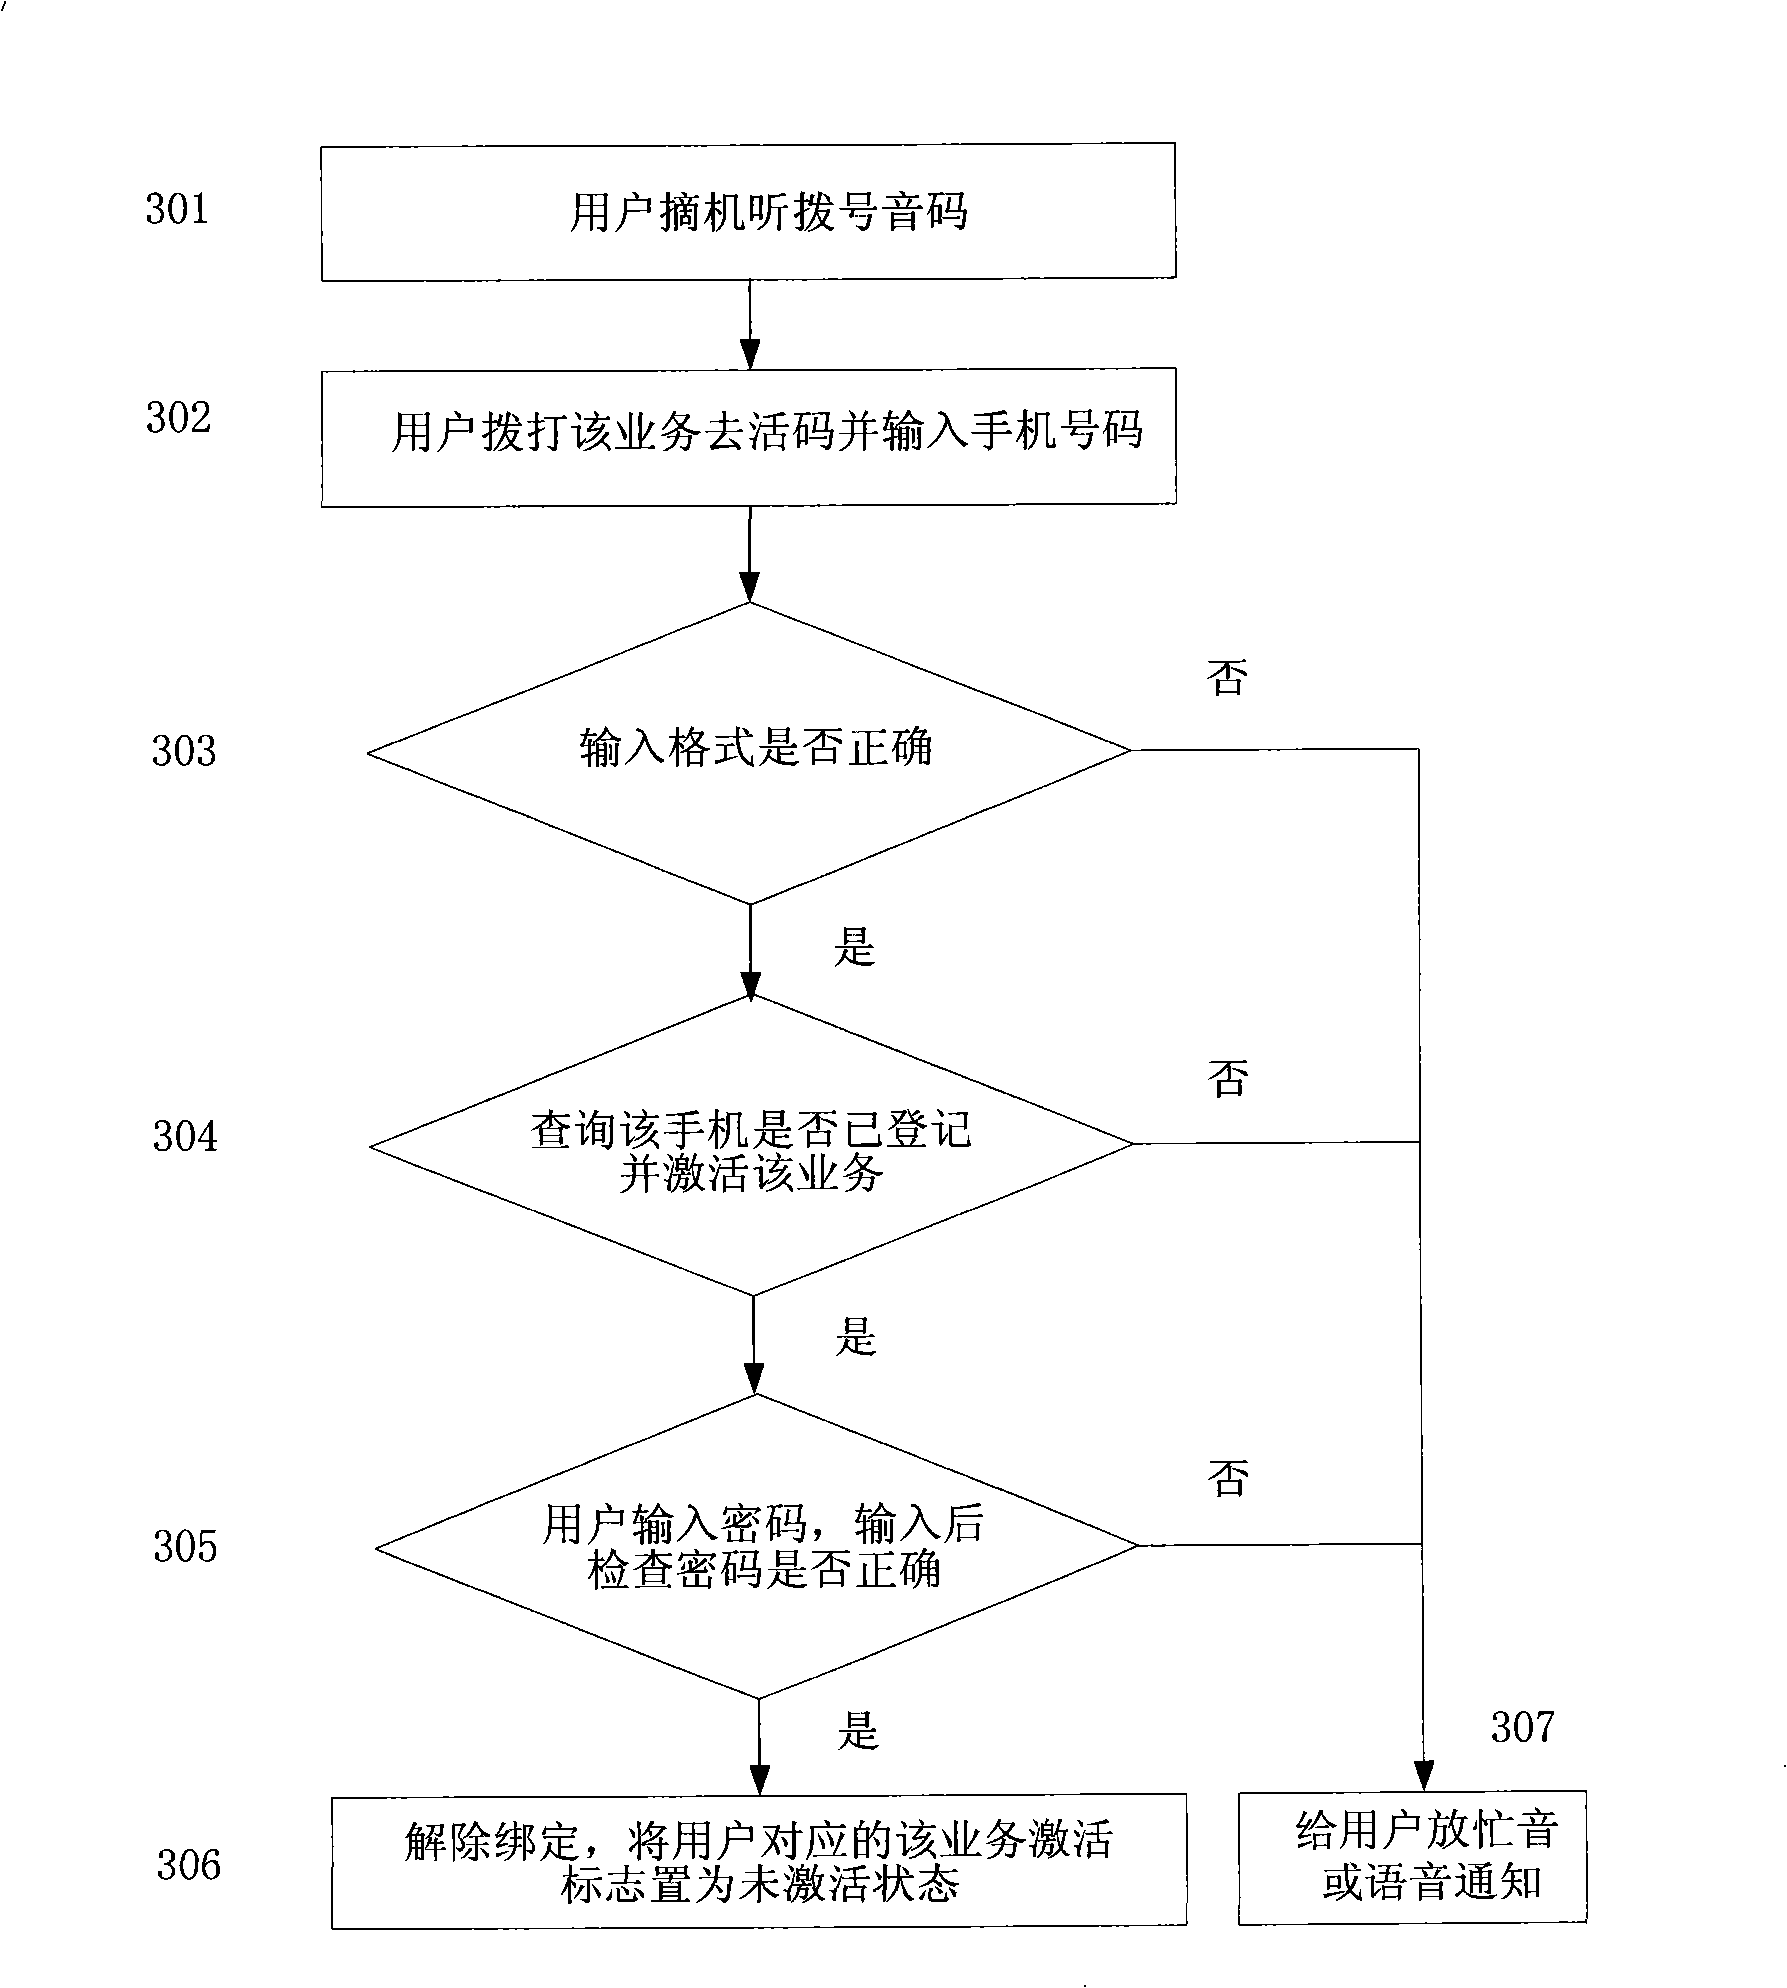 Method and system for translating the call of numbers in a group to a mobile number into calls in a group